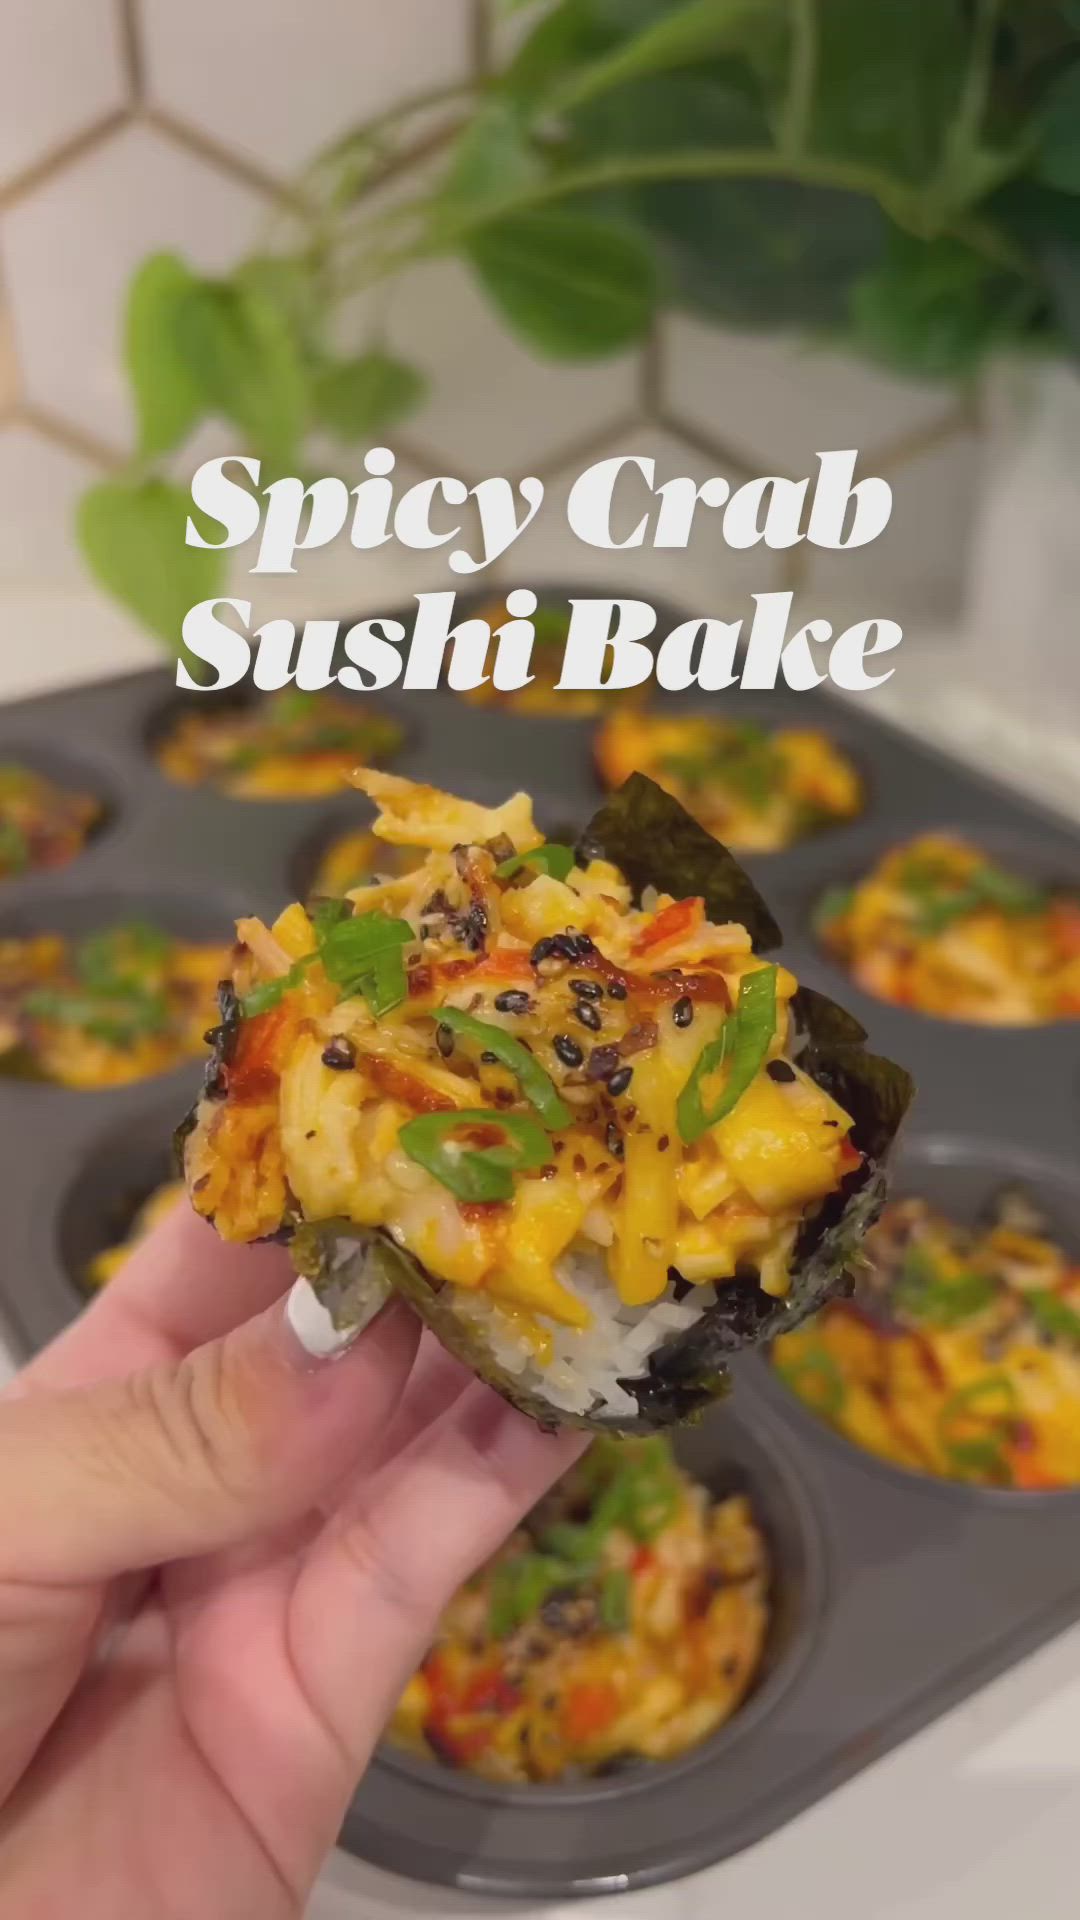 This may contain: someone is holding up some food in a muffin tin with the words spicy crab sushi bake on it